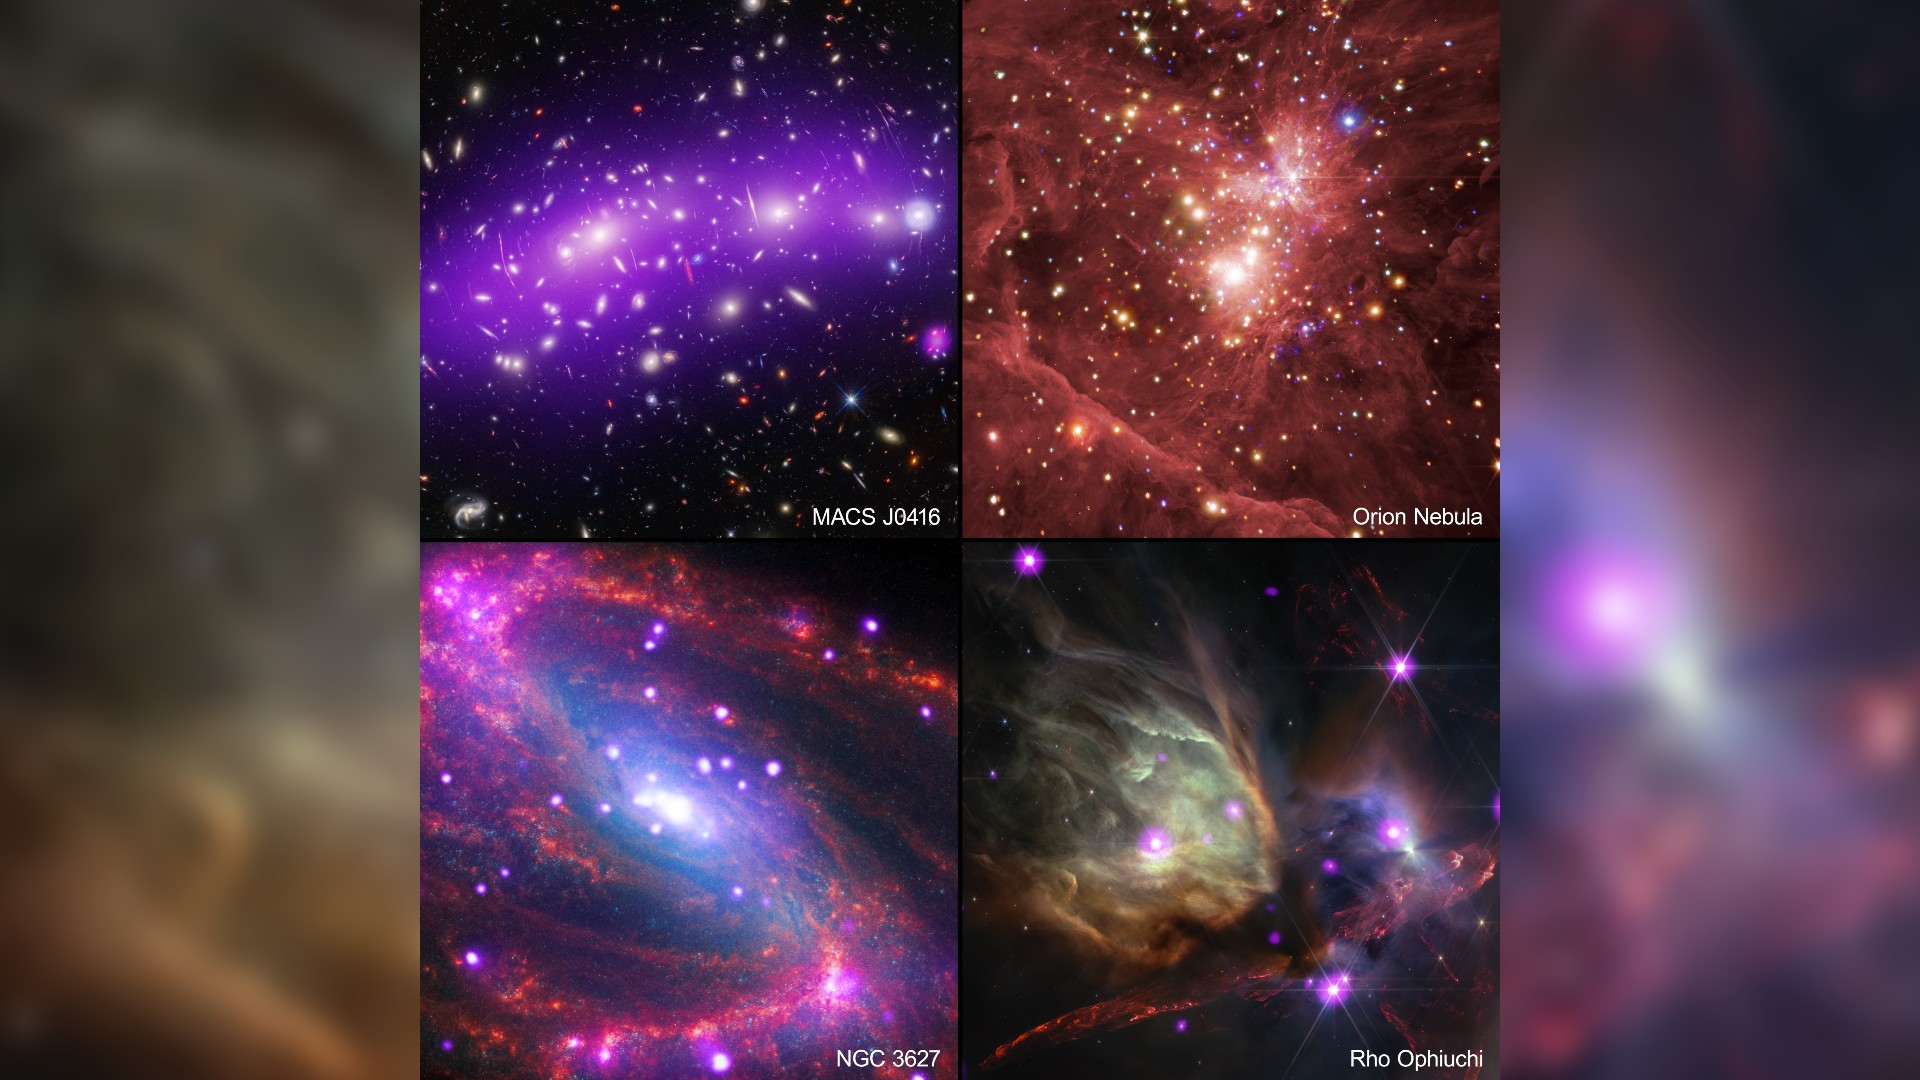  Road trip! Tour the universe with these gorgeous images from NASA's Chandra X-ray telescope 